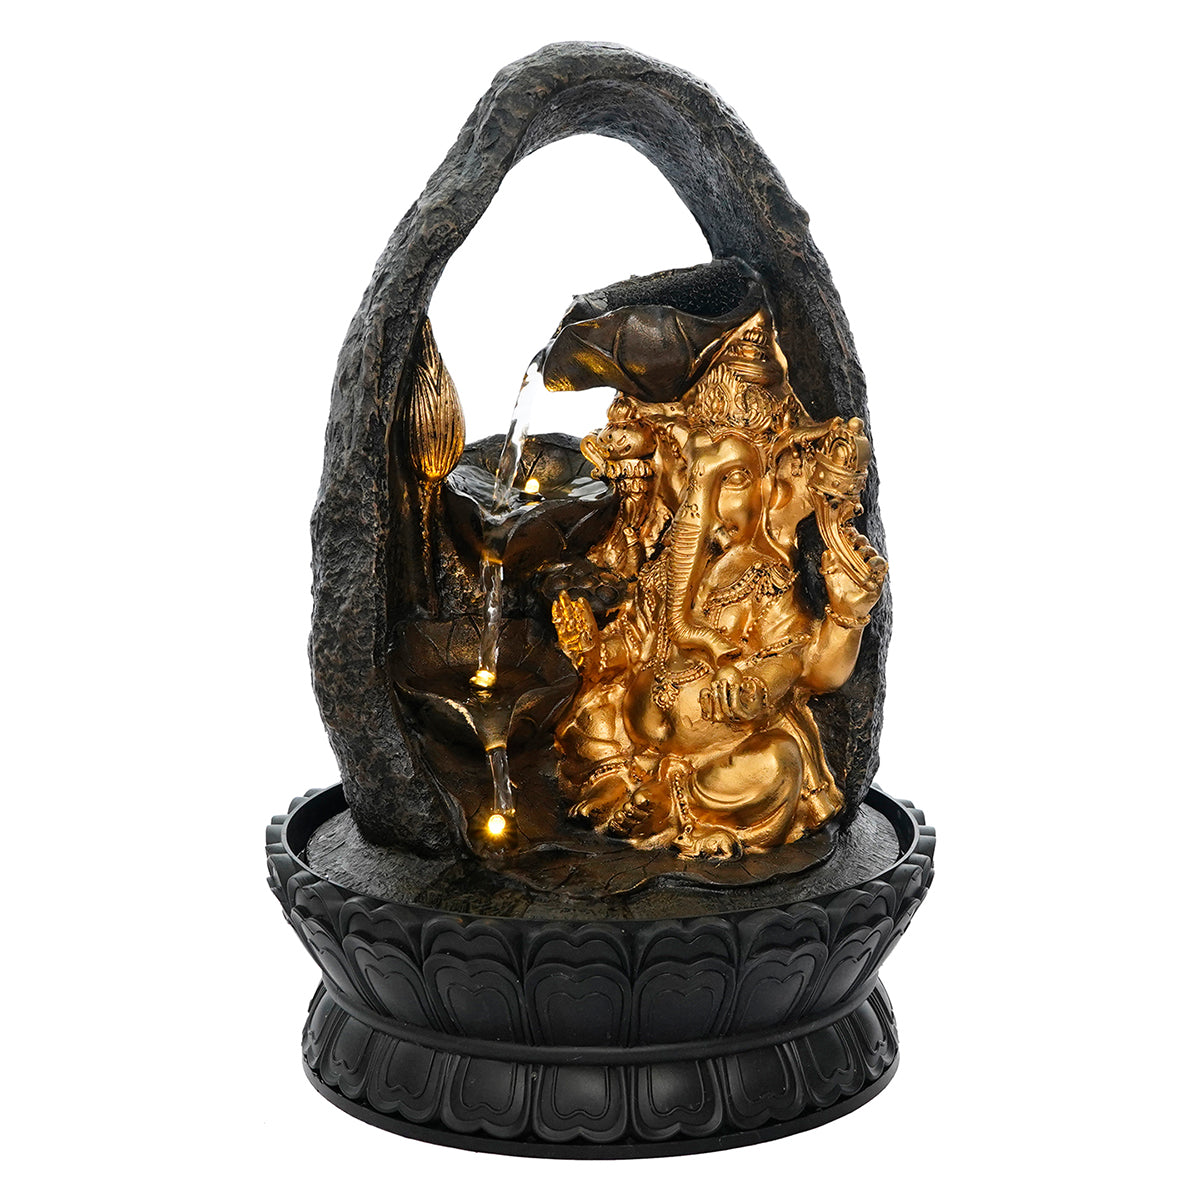 Polystone Black and Golden Decorative Lord Ganesha Idol Water Fountain With Light For Home/Office Décor 1